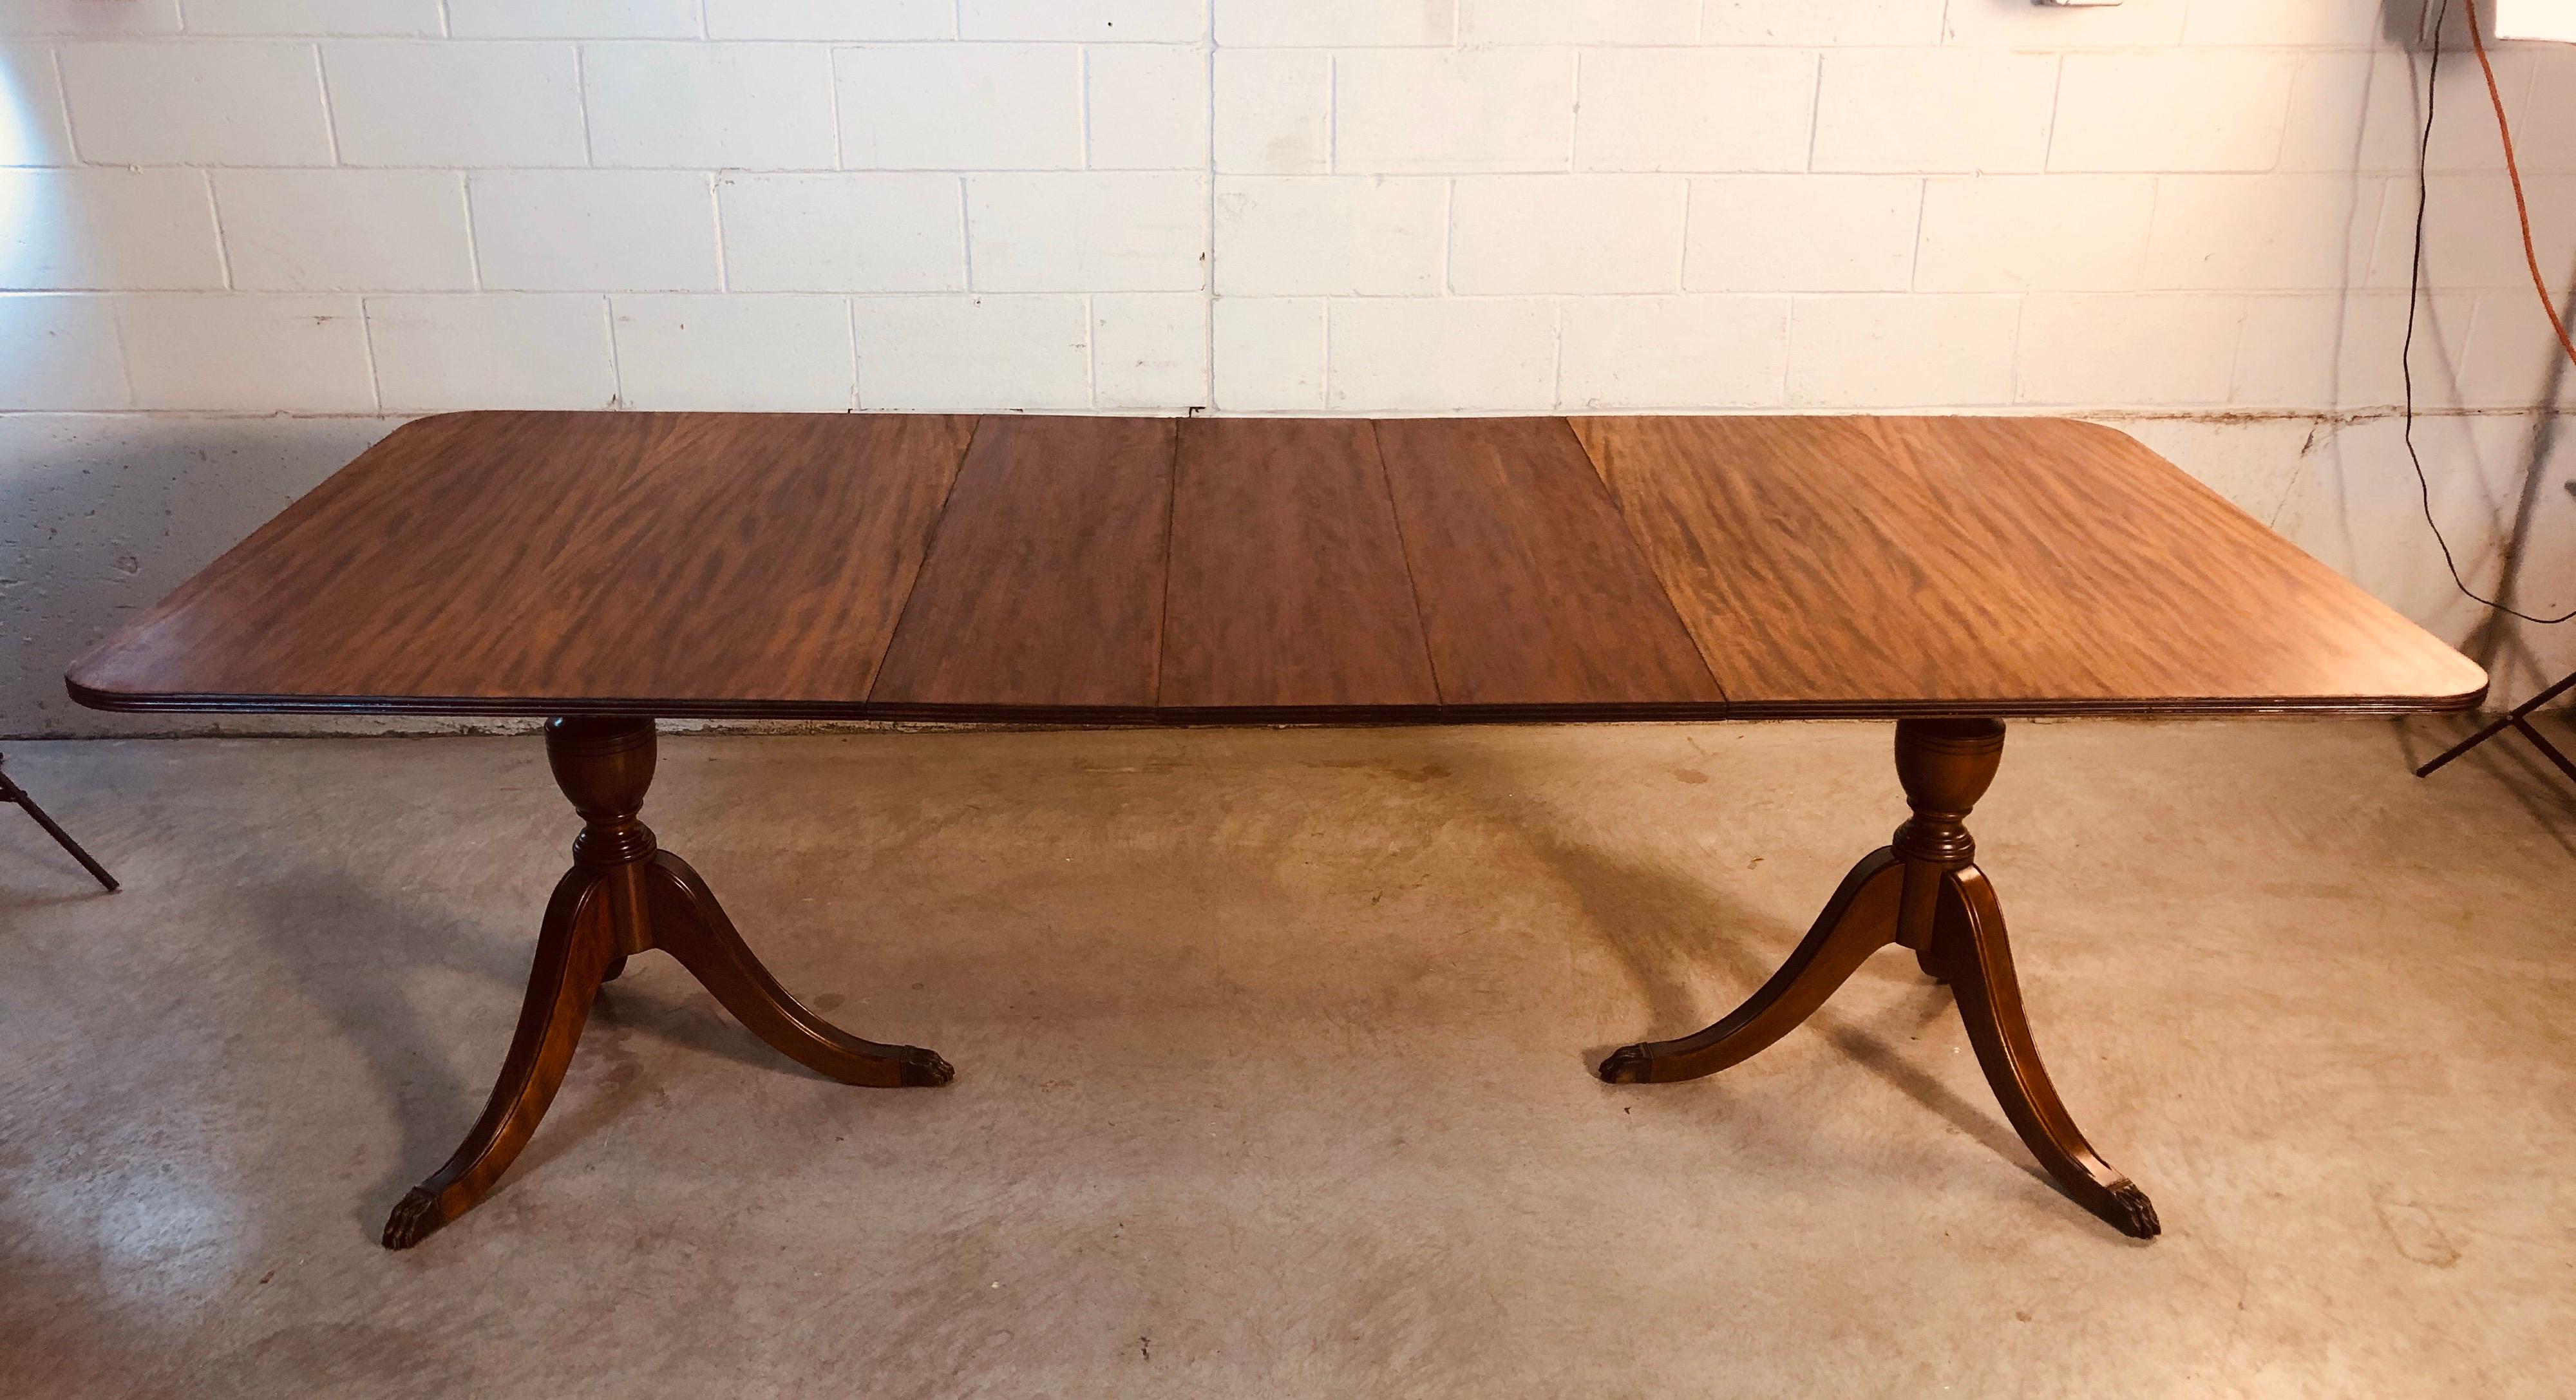 Vintage 1930s mahogany wood banquet style dining room table. The dining table is double pedestal and comes with three extra boards. The table is newly refinished and shows the mahogany grain. Table fully open, 95” L. Boards, 11” L each. Table